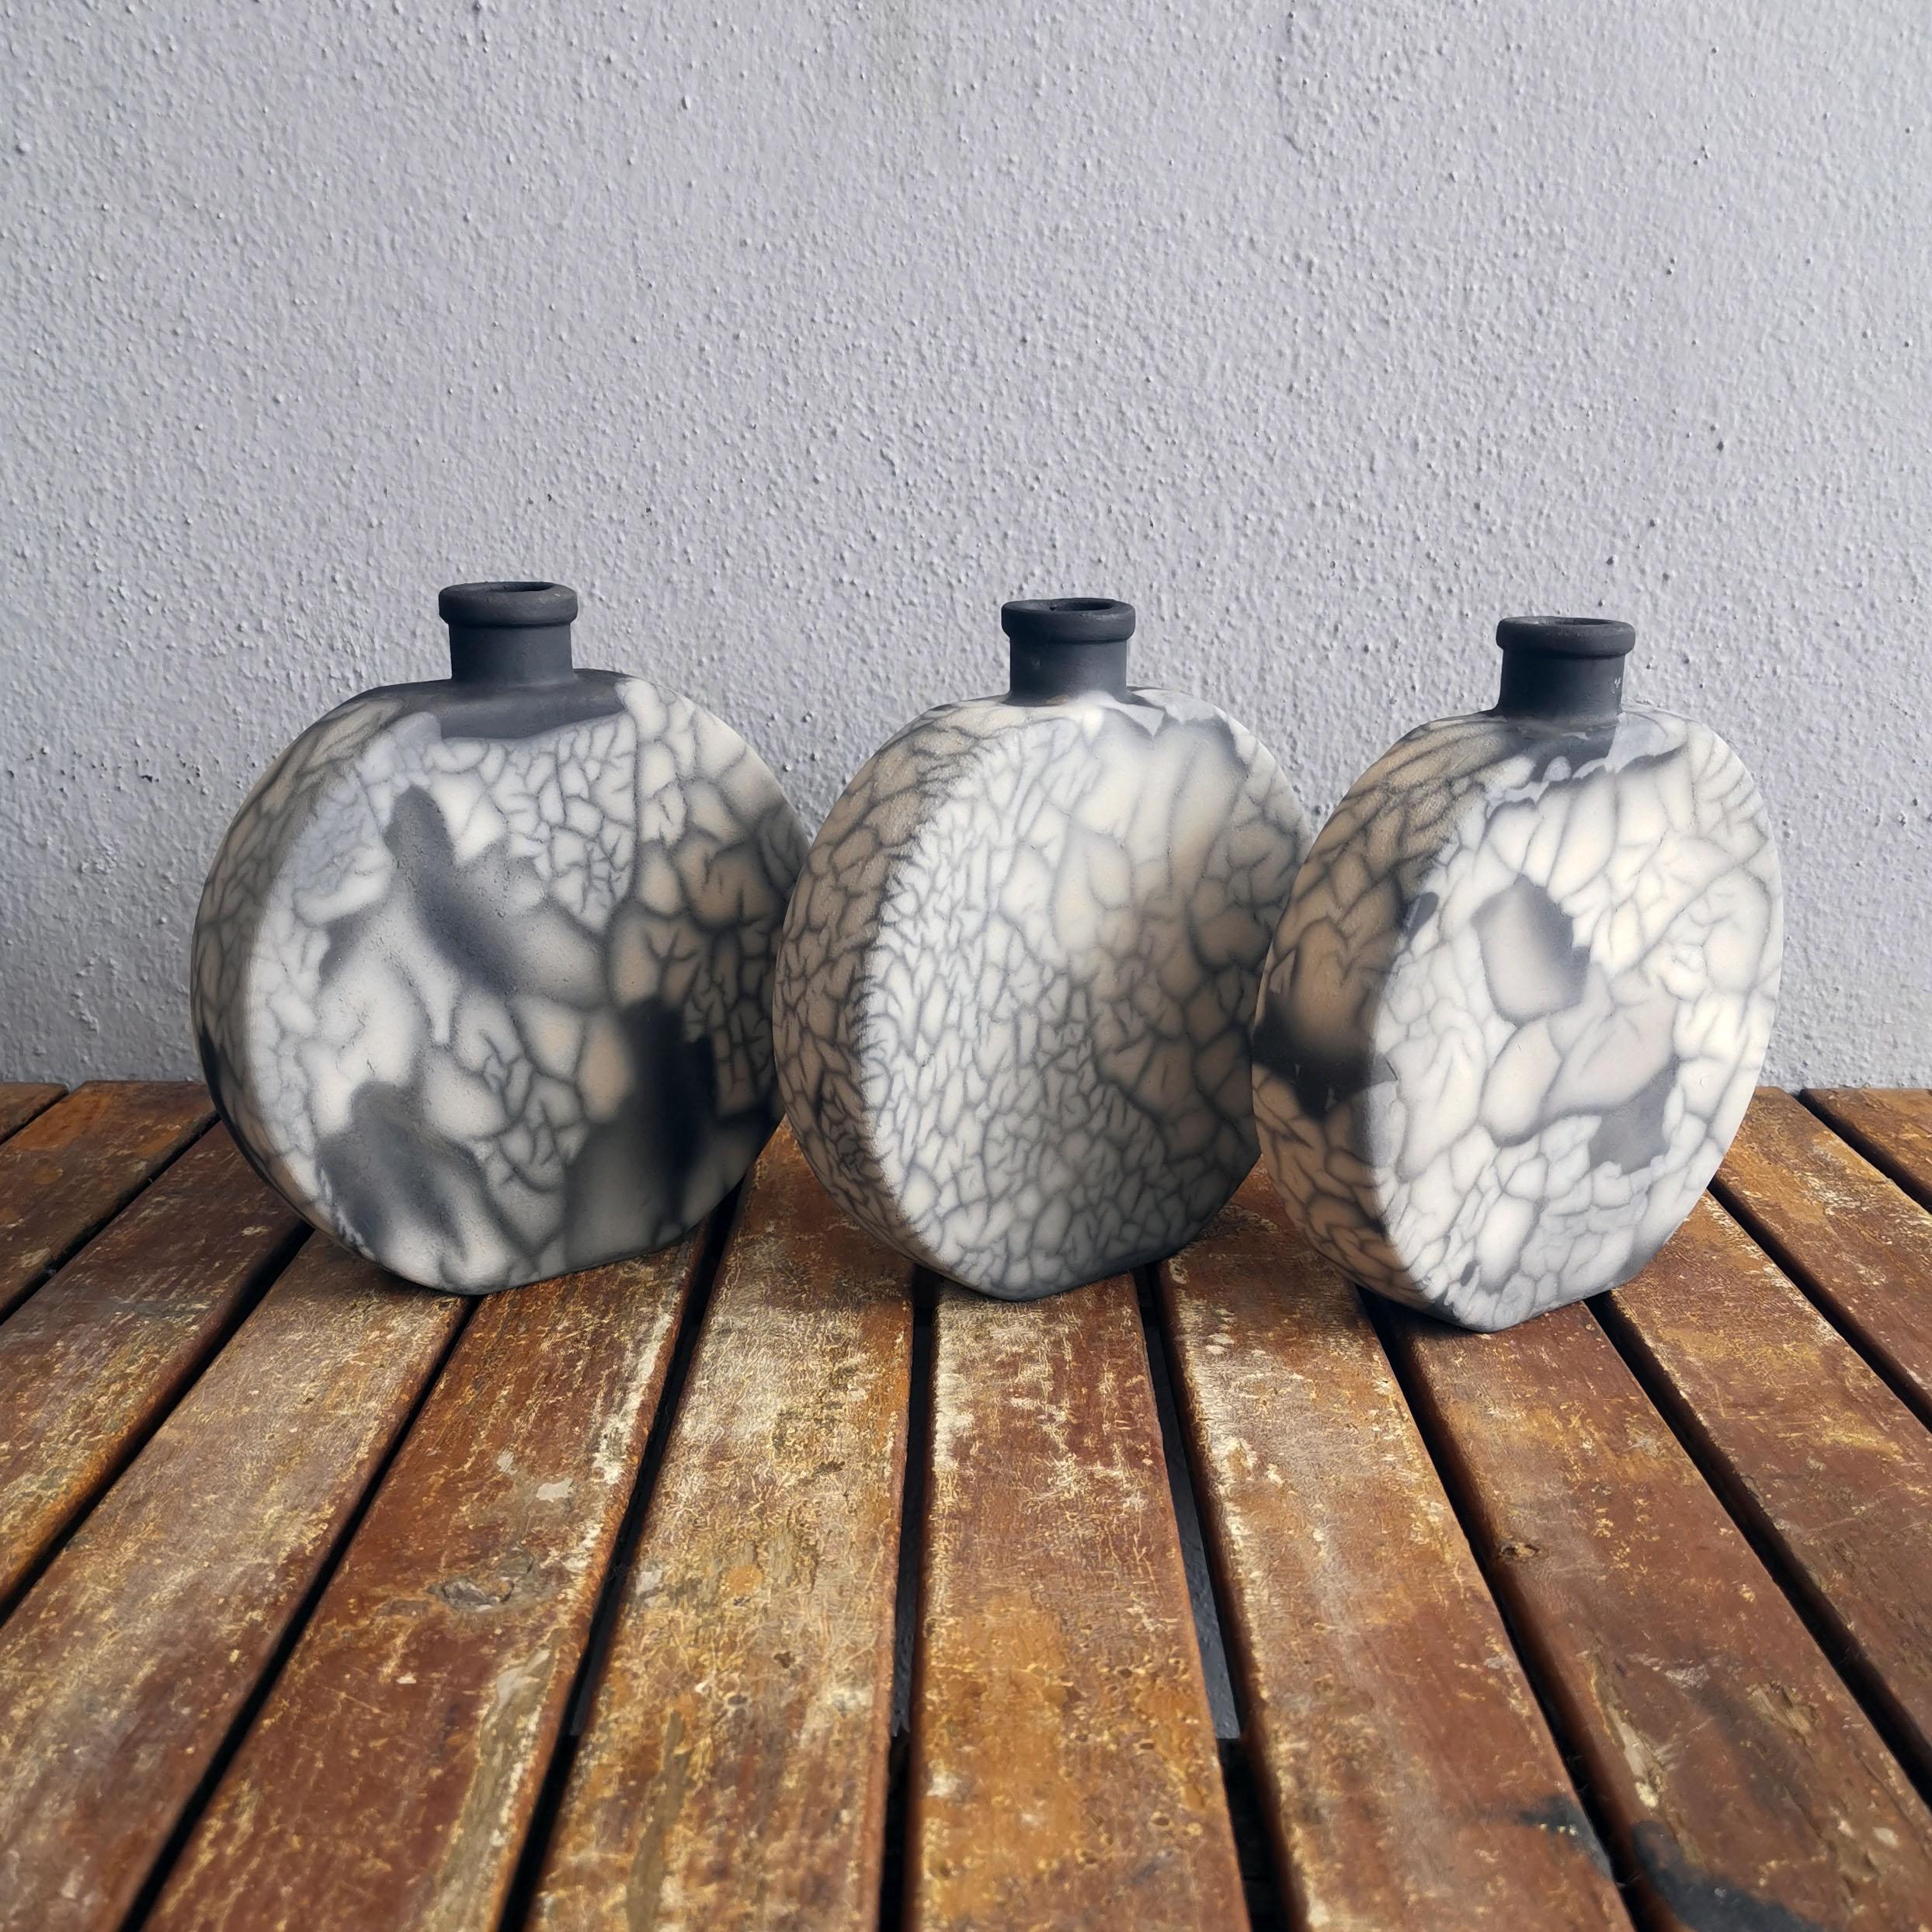 You get :

3 Units of Kumo Vase

Kumo ( 雲 ) ~  (n) cloud

Our Kumo Vase is a flattened globe vase with a narrow base and a narrow mouth. Its contemporary shape promises to blend well with any interior style.

The Kumo vase is best paired with our